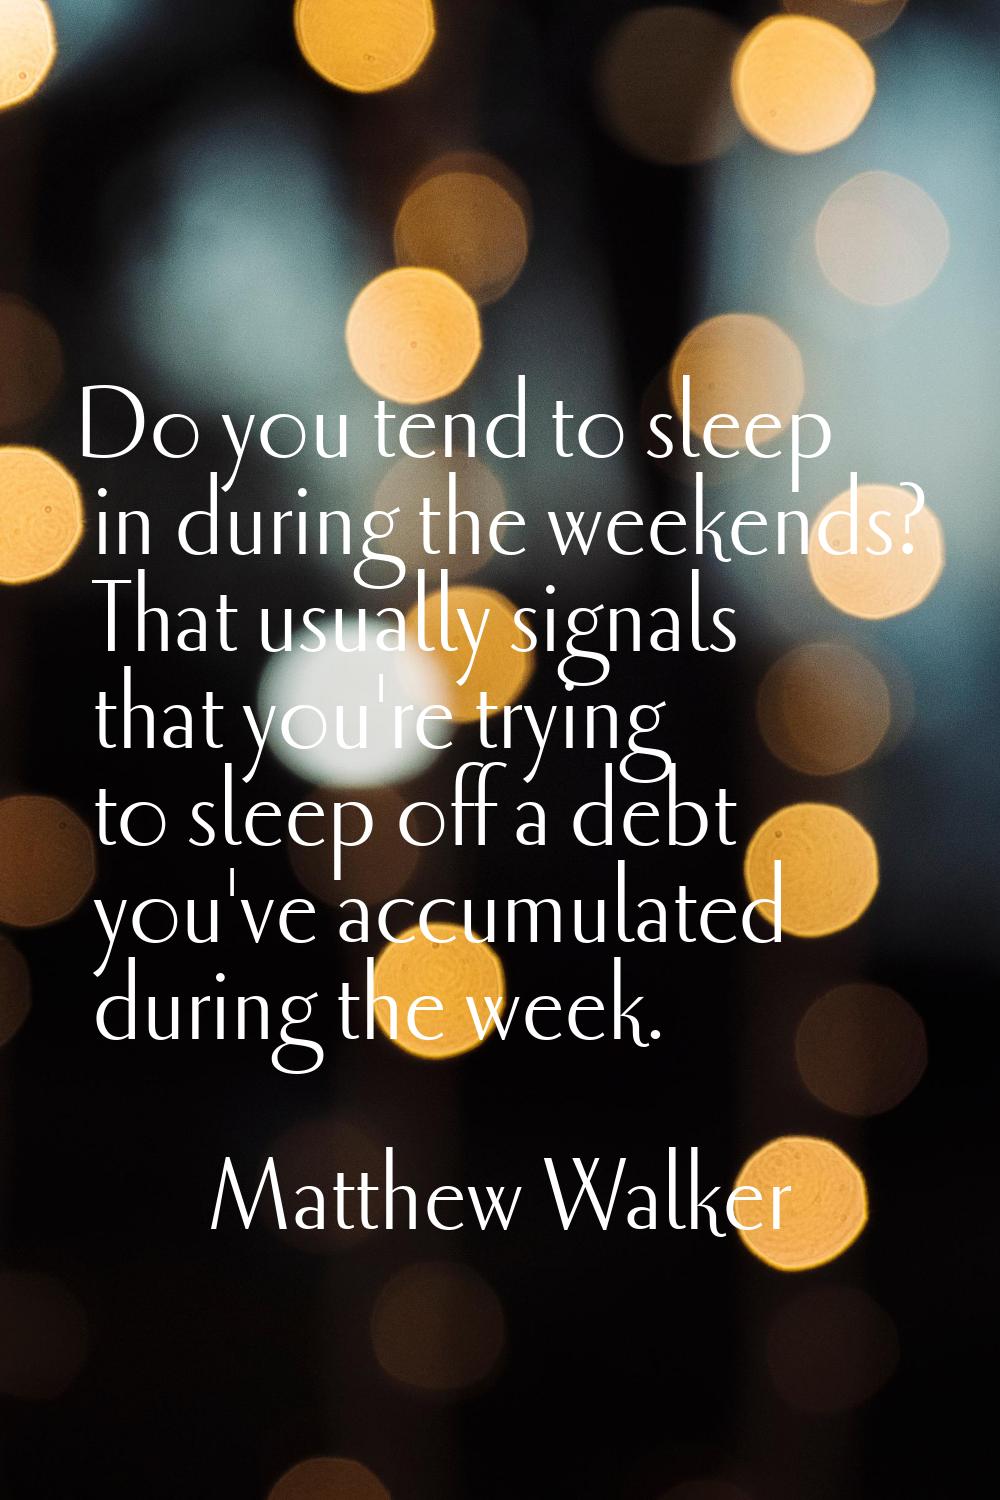 Do you tend to sleep in during the weekends? That usually signals that you're trying to sleep off a